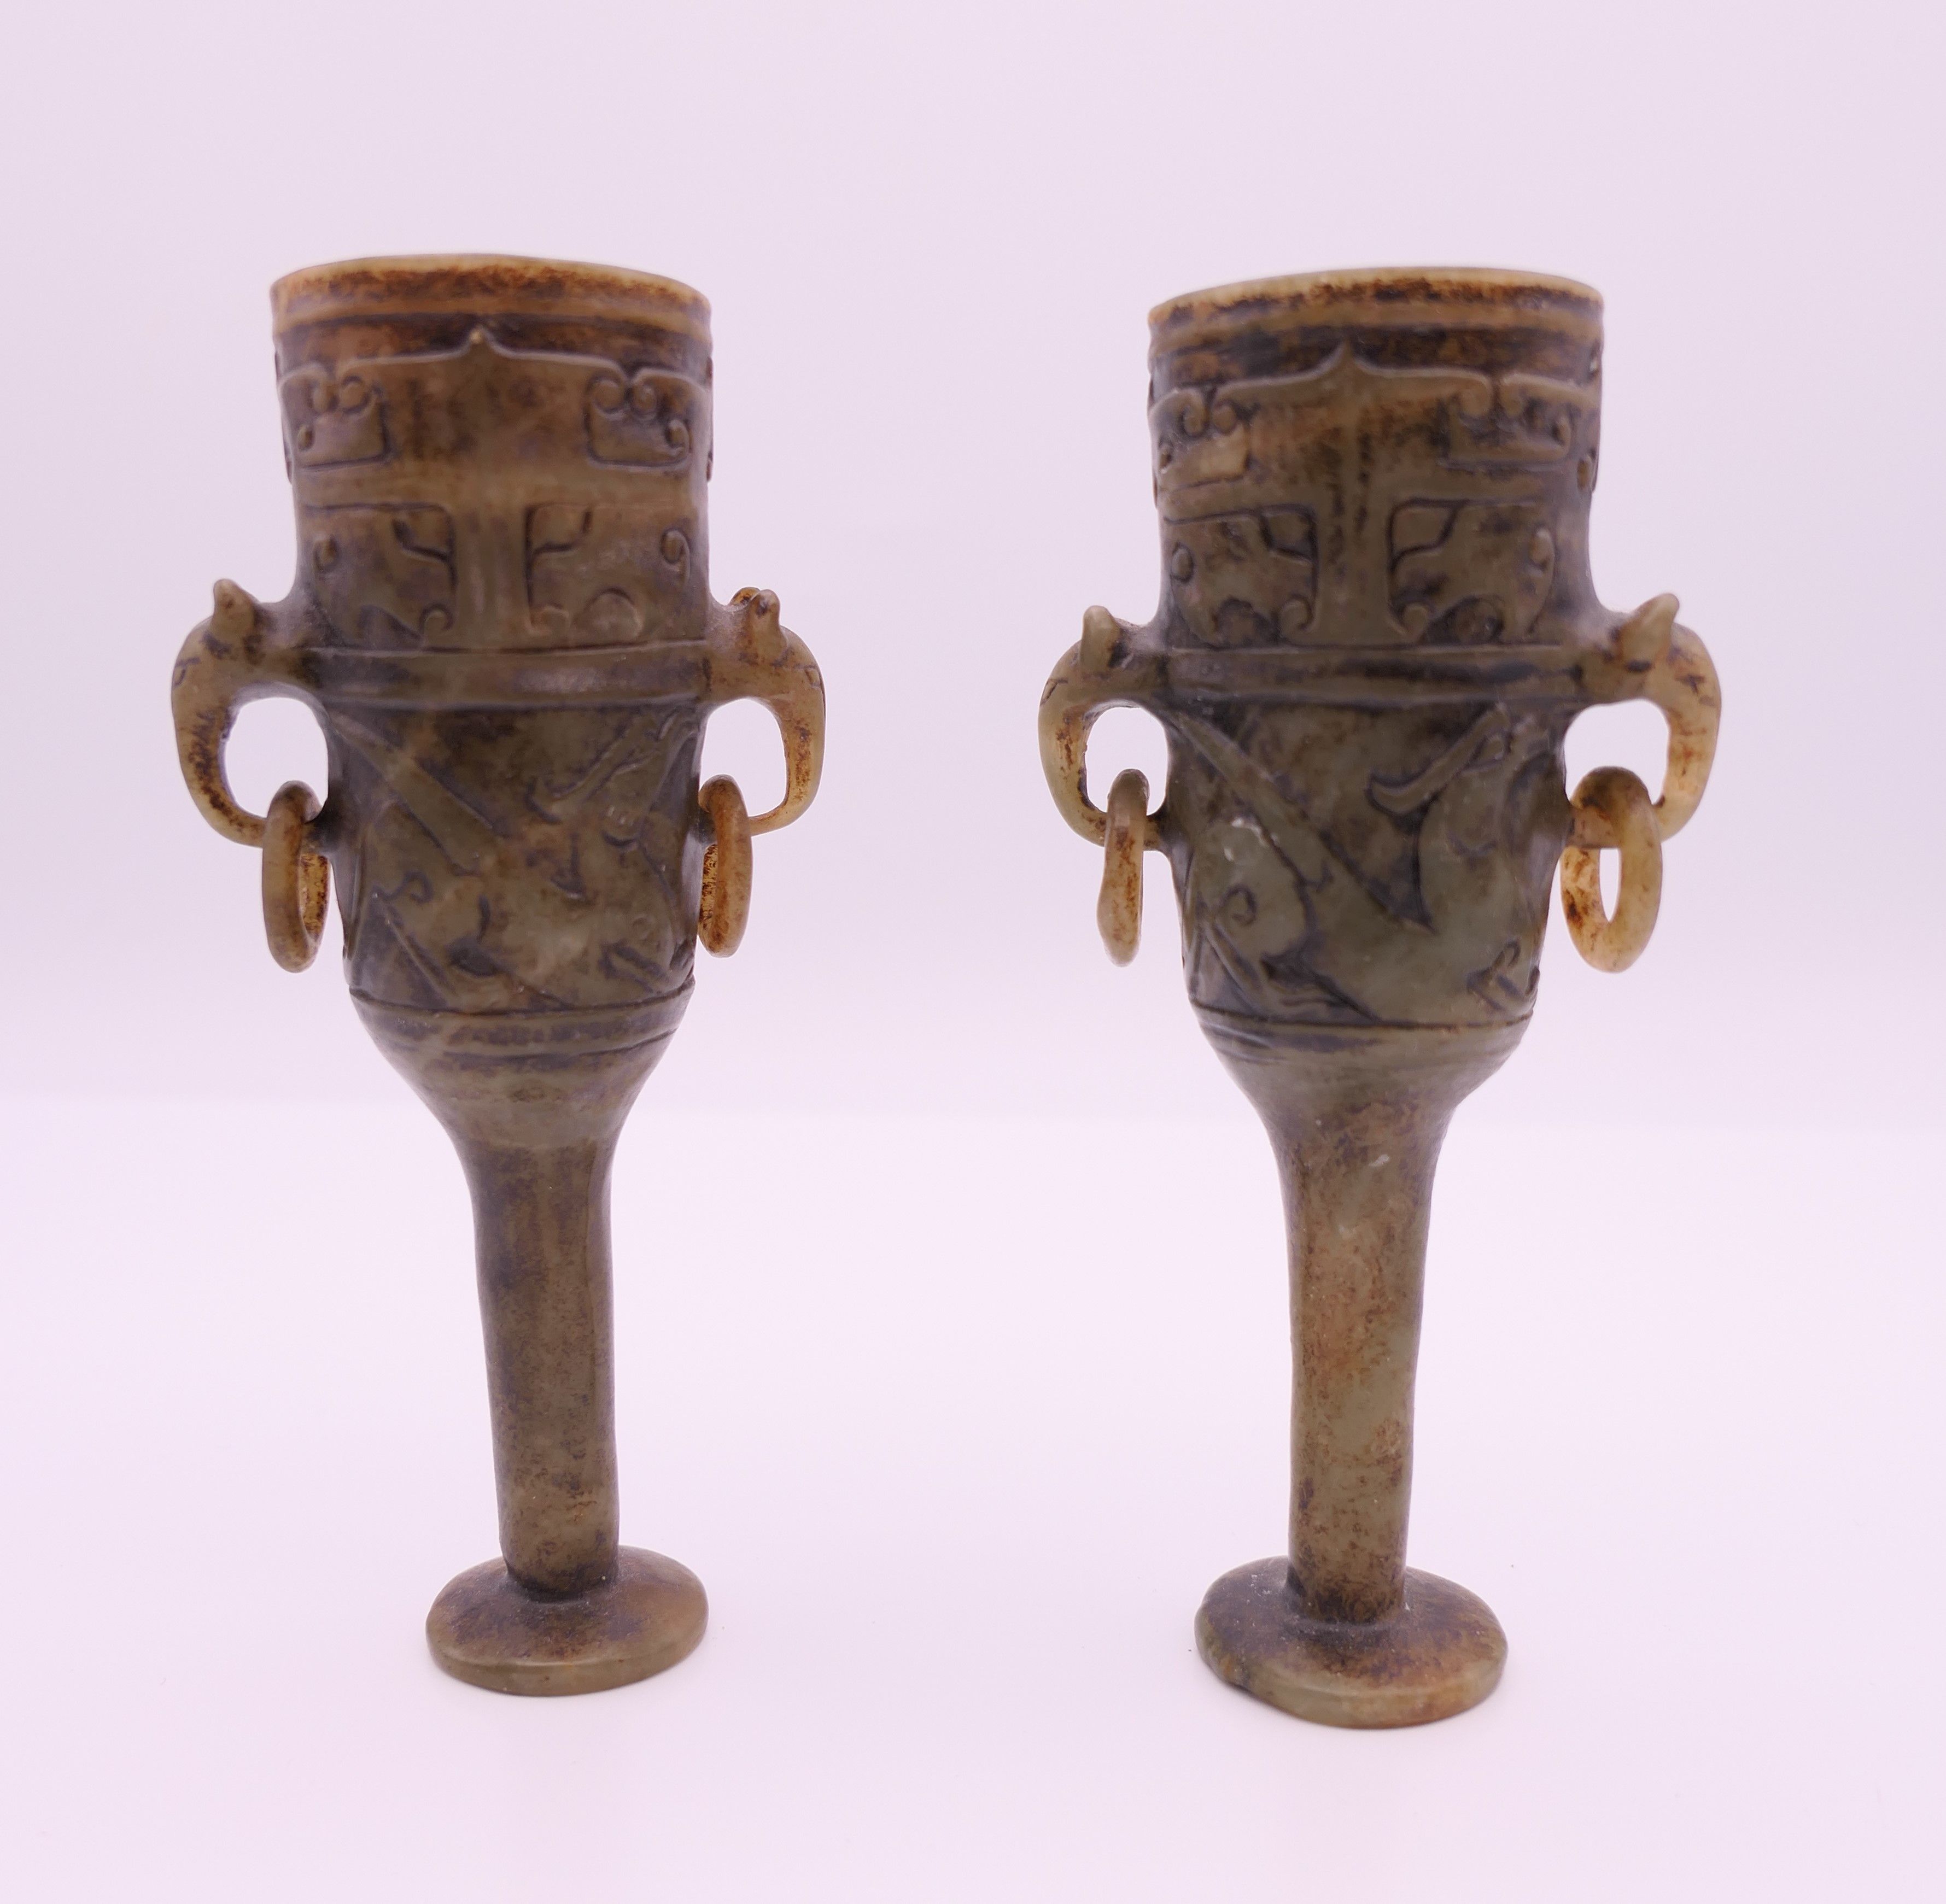 A pair of small Chinese archaic style jade vases. 11 cm high. - Image 2 of 8